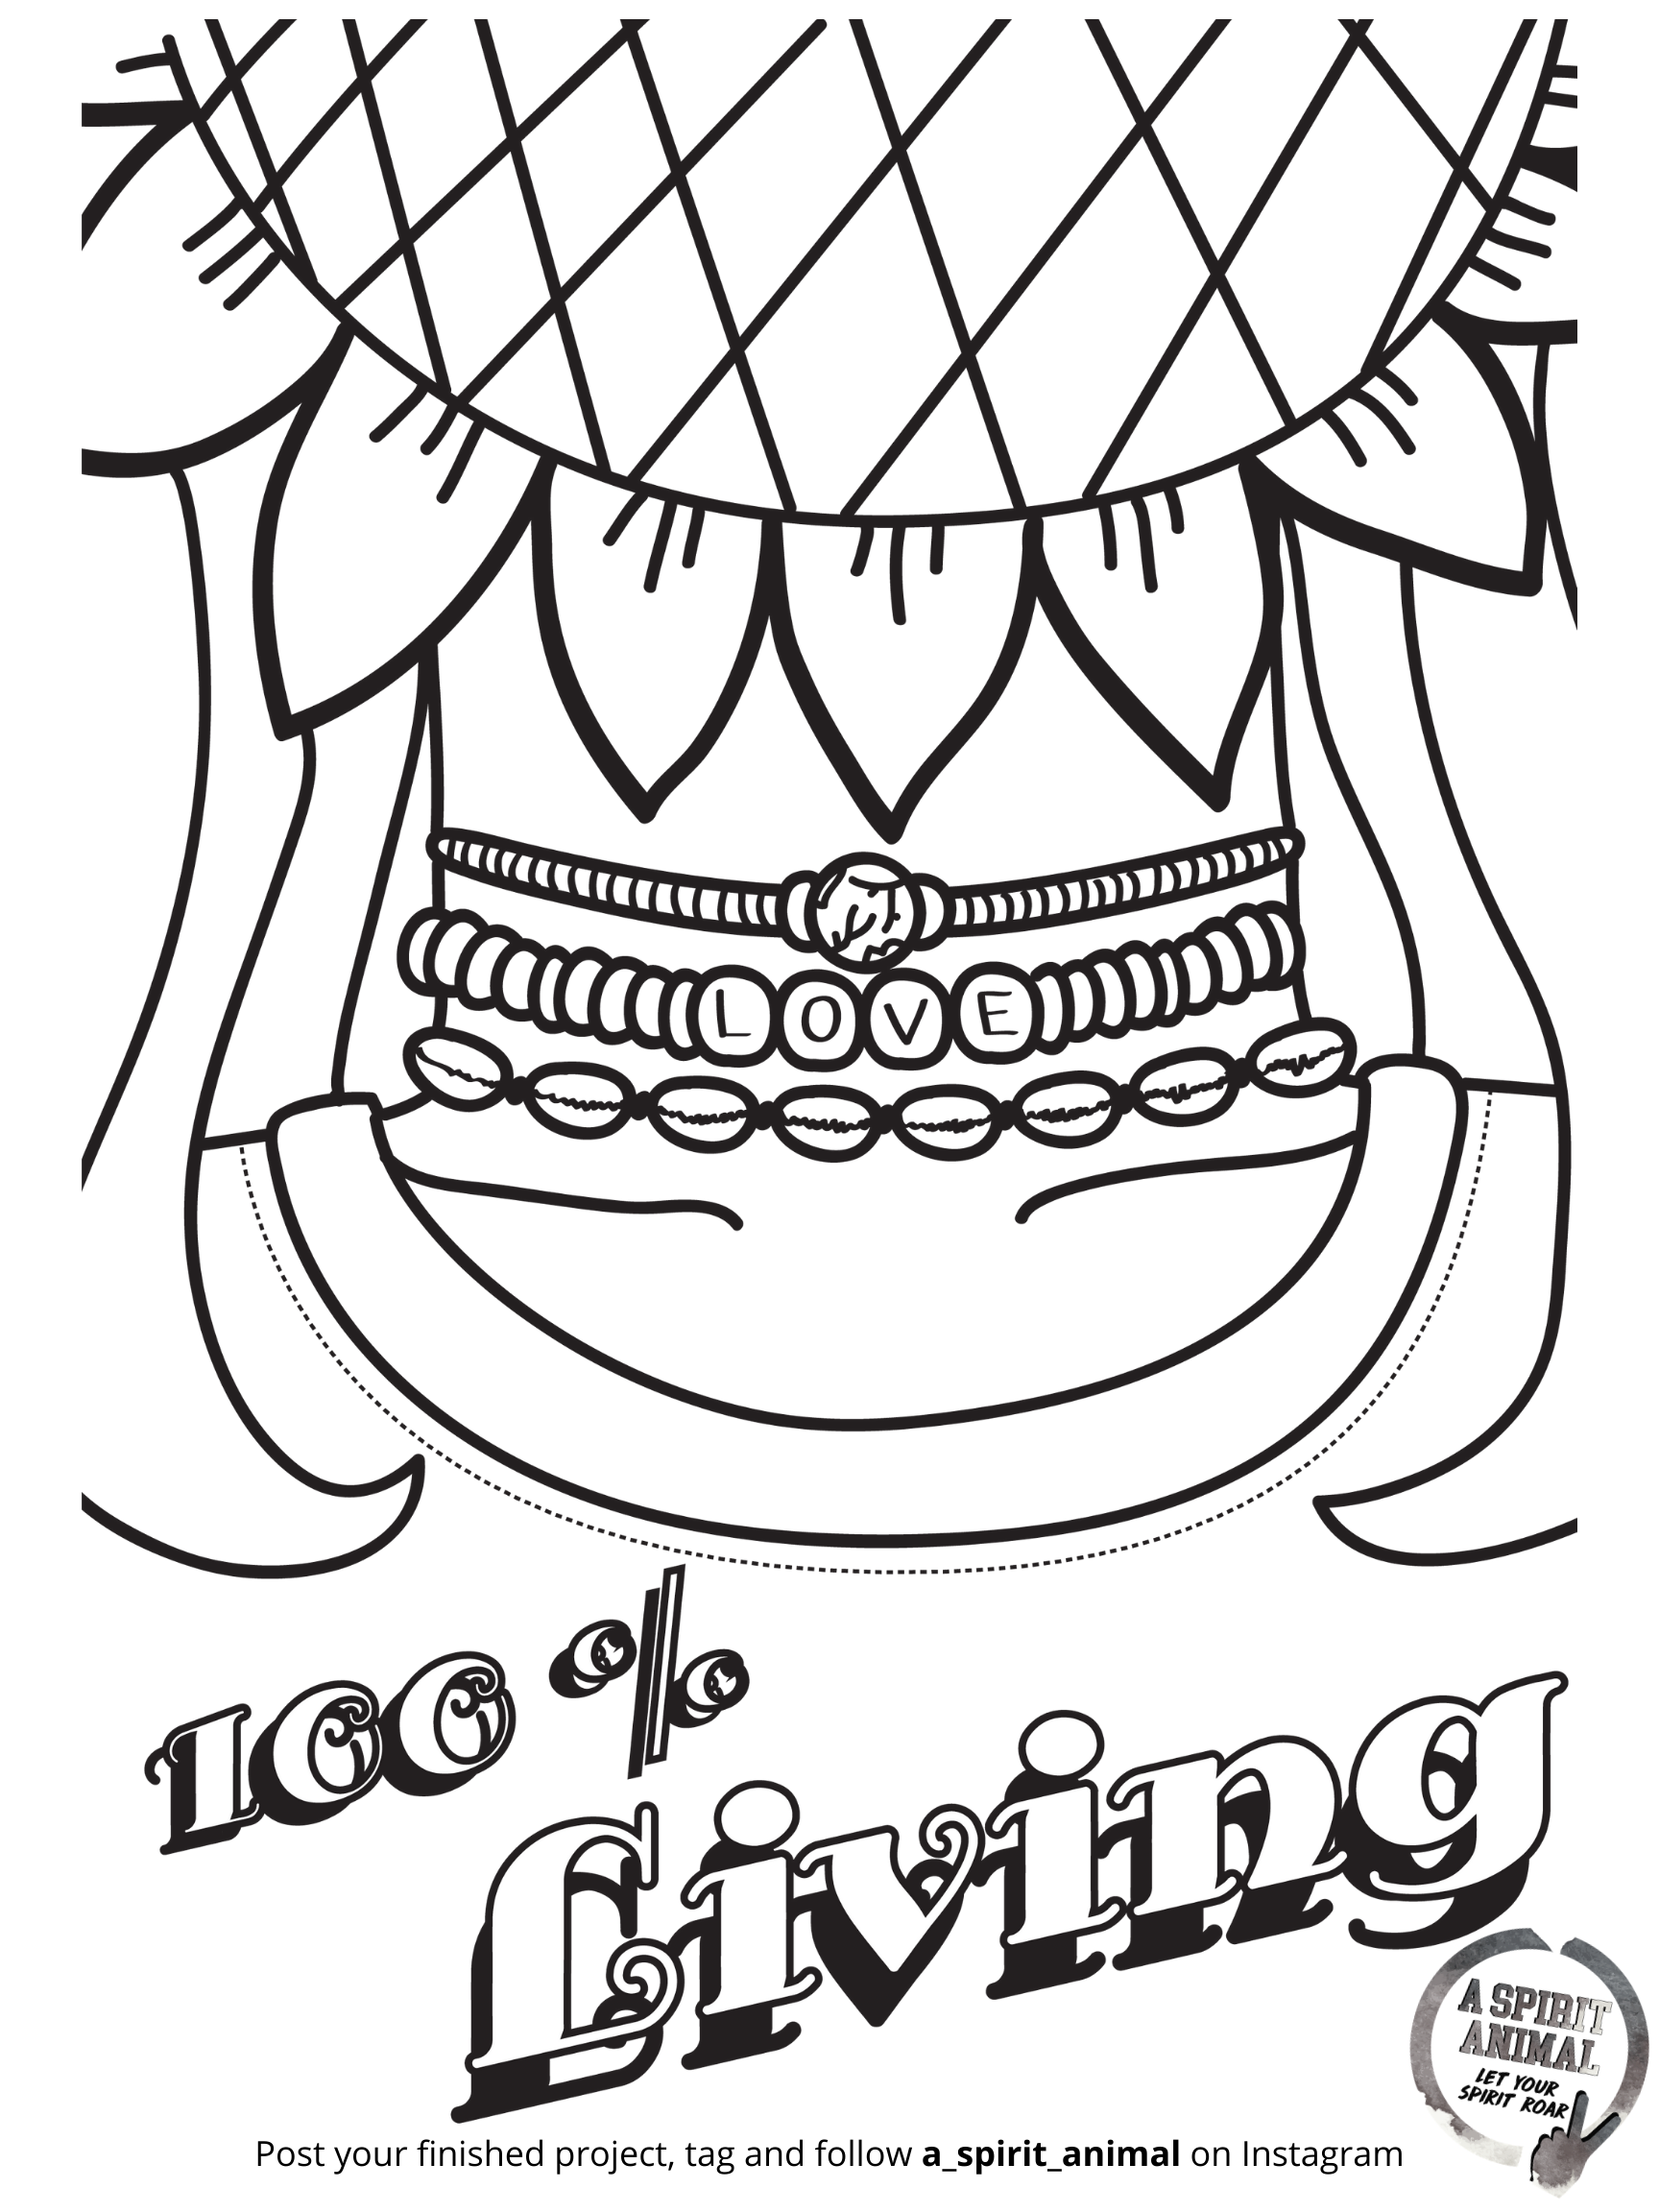 100% Living VSCO Girl Coloring Page - a Spirit Animal